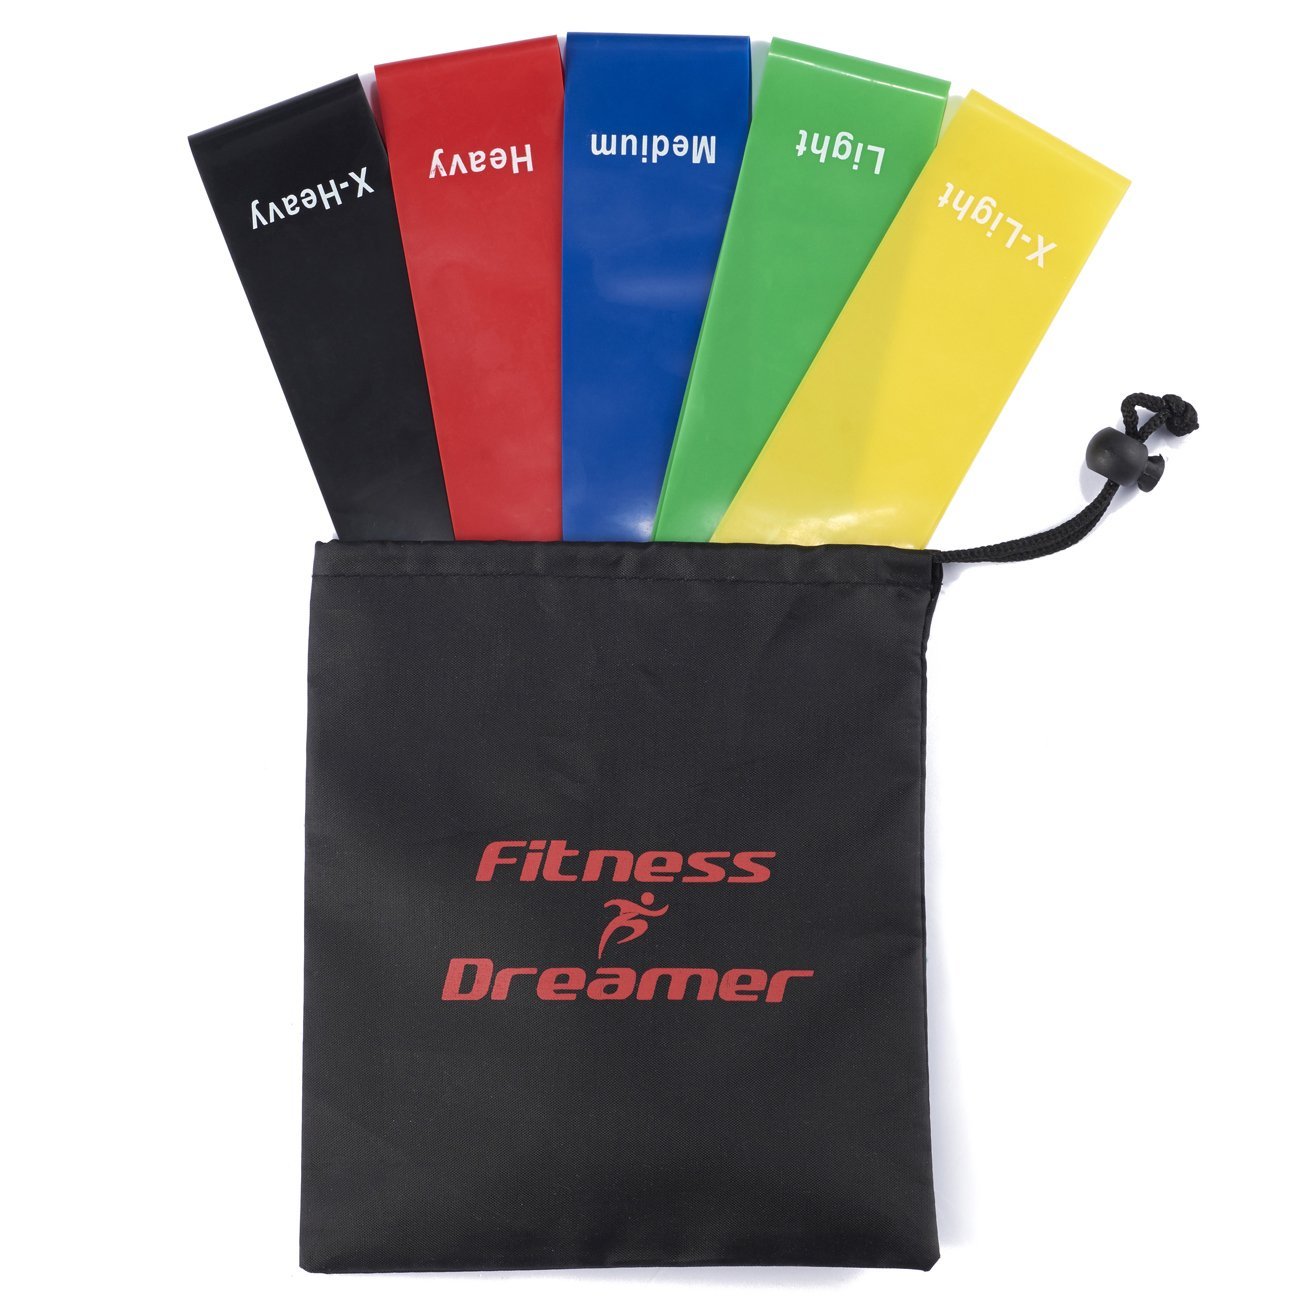 Fitness Dreamer Resistance Bands, Exercise Loop bands and Workout Bands by Set of 5, 12 In. Fitness Bands for Training or Physical Therapy-Improve Mobility and Strength - image 4 of 7